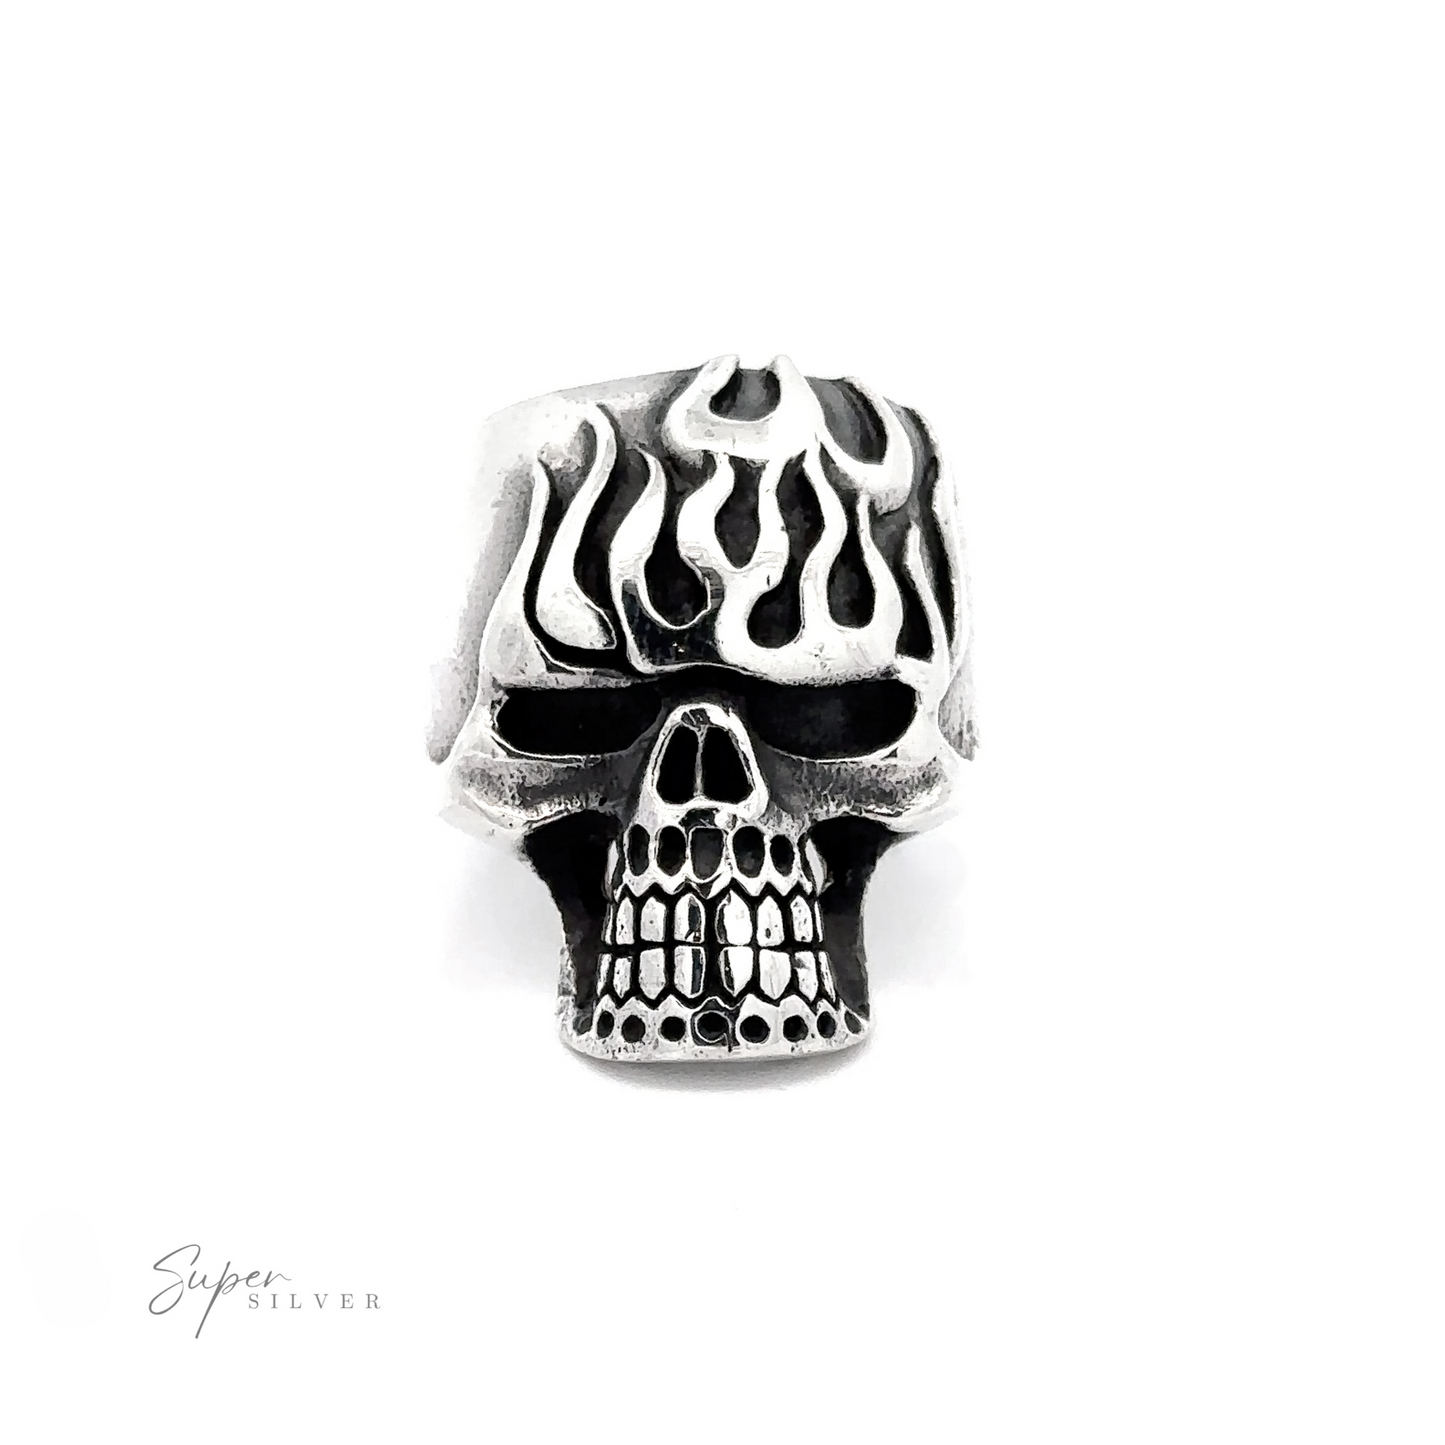 A Flaming Skull Statement Ring shaped like a skull with flame details on the forehead. Super Silver logo in the bottom left corner.